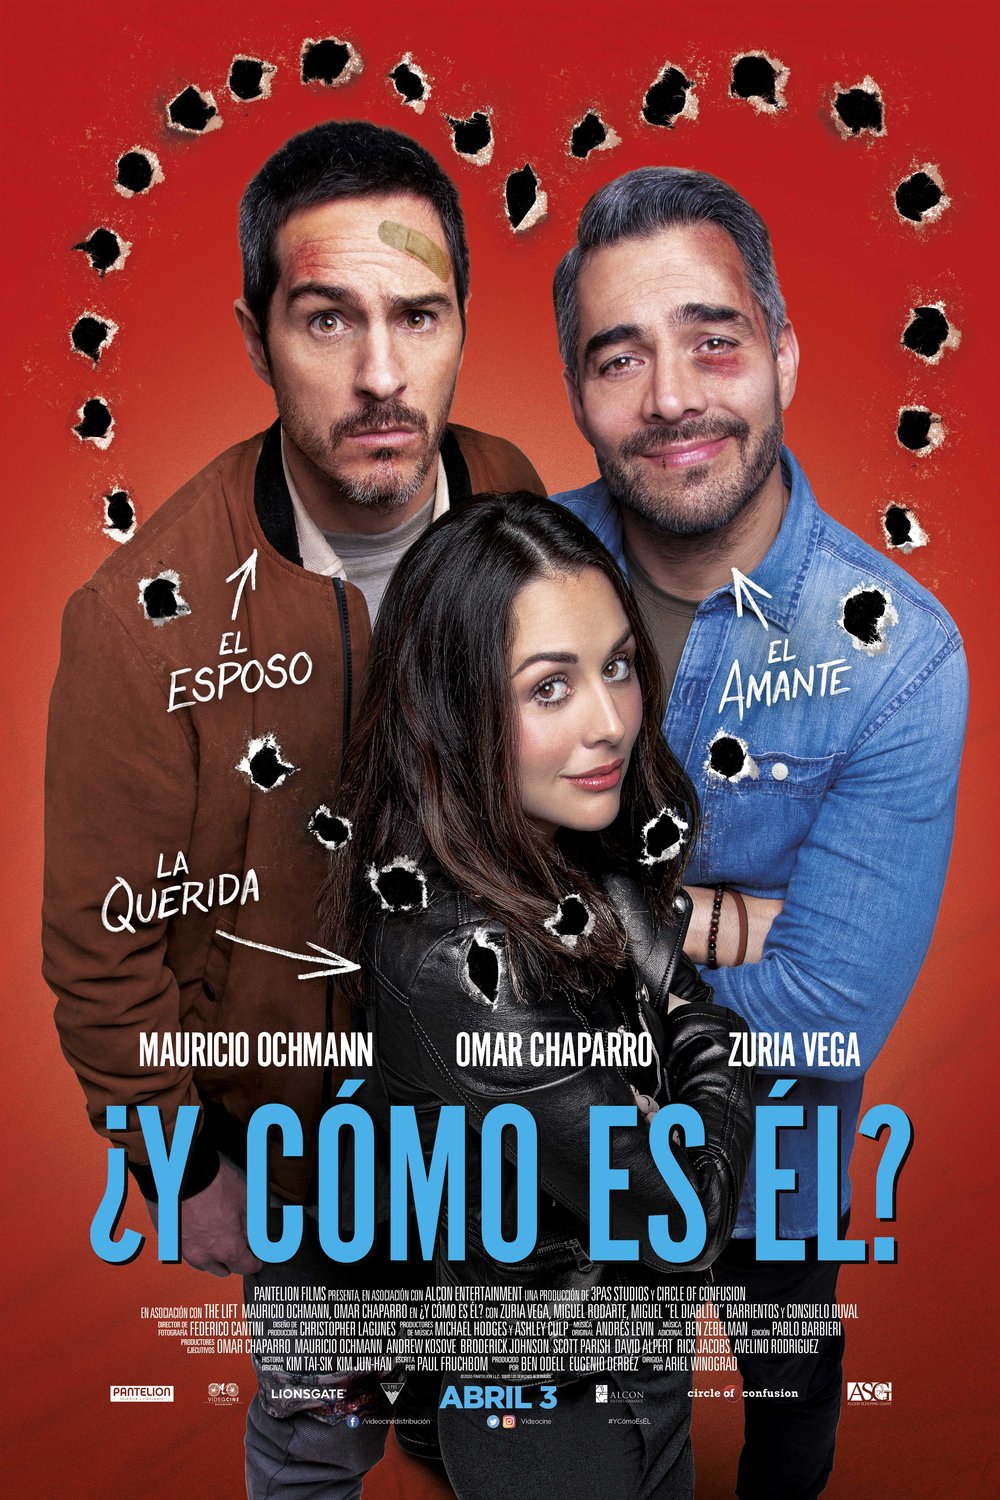 Spanish poster of the movie Backseat Driver